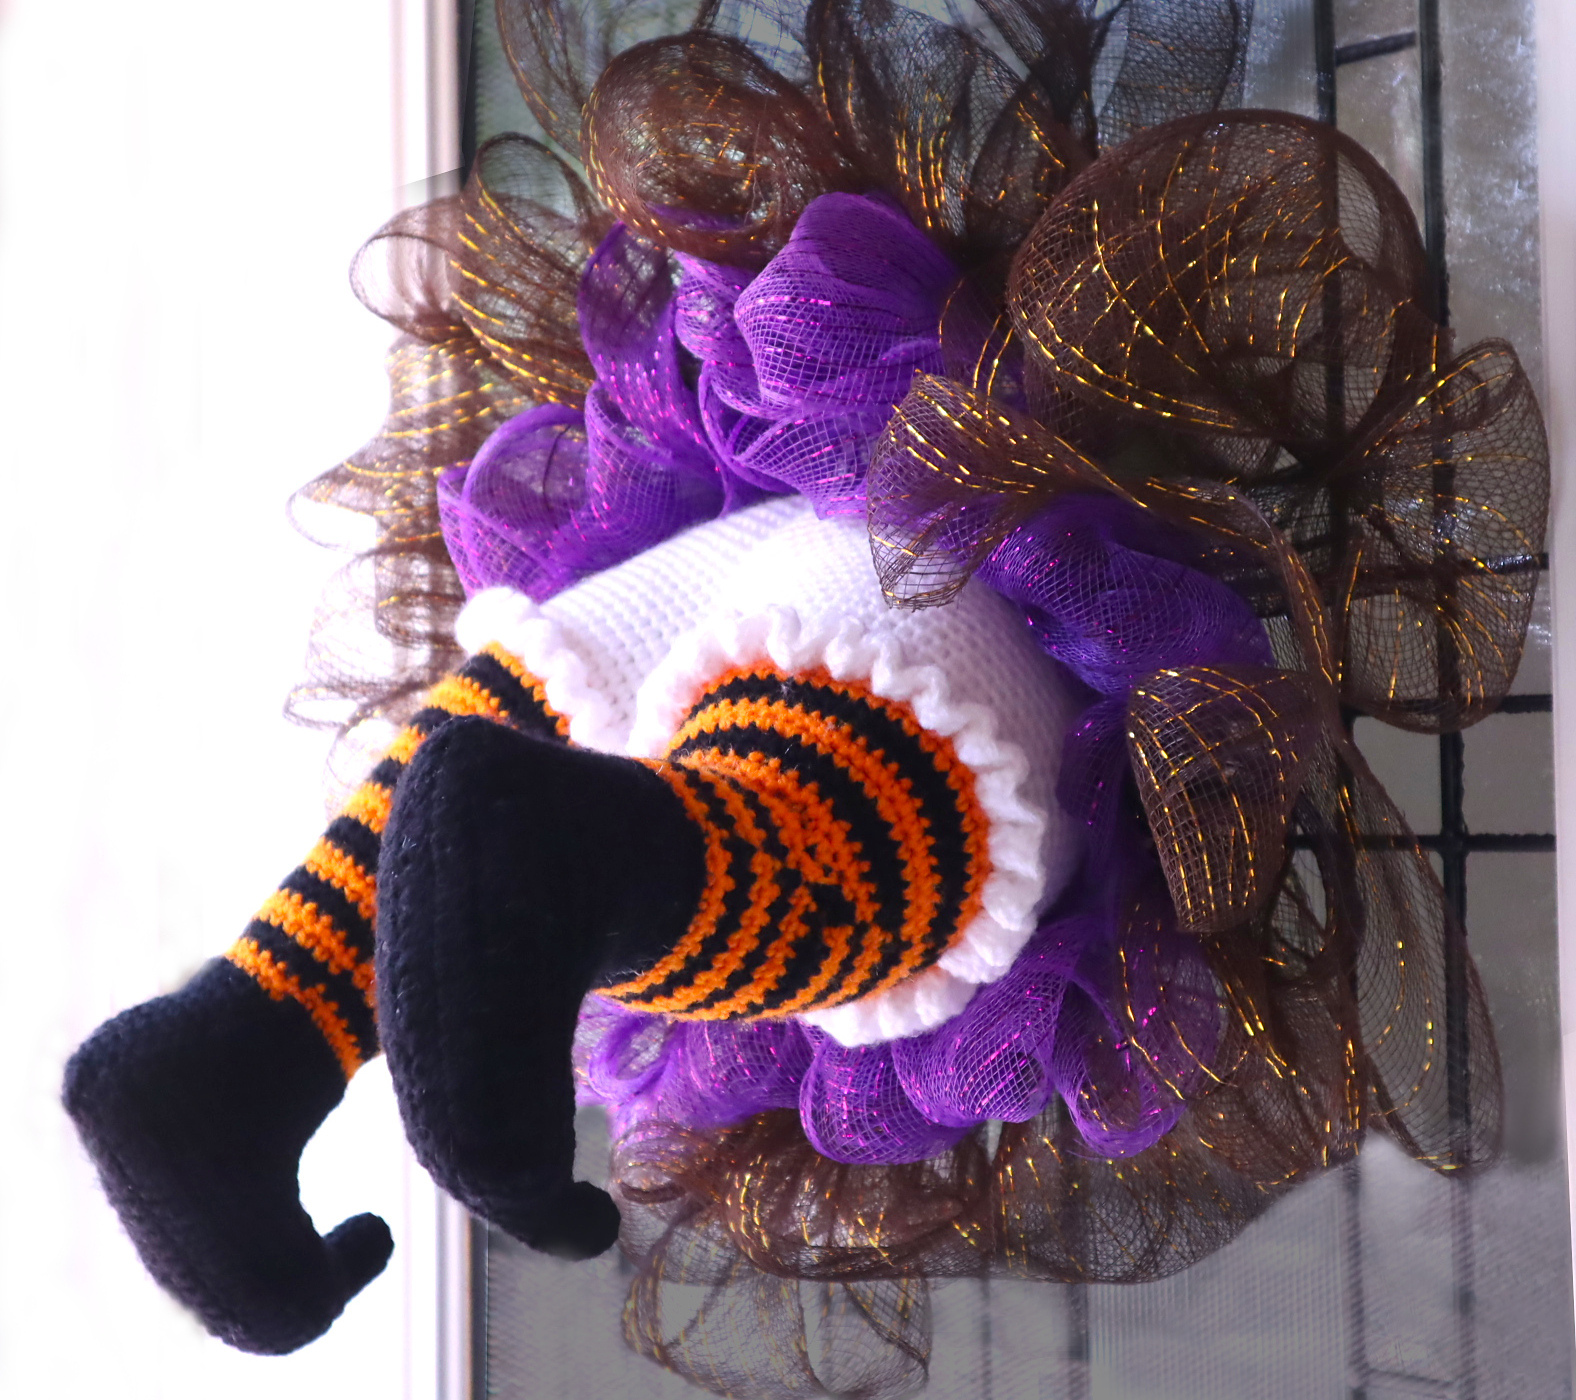 Crochet Halloween Wreath Free Pattern - There's a Witch Stuck in My Wreath!